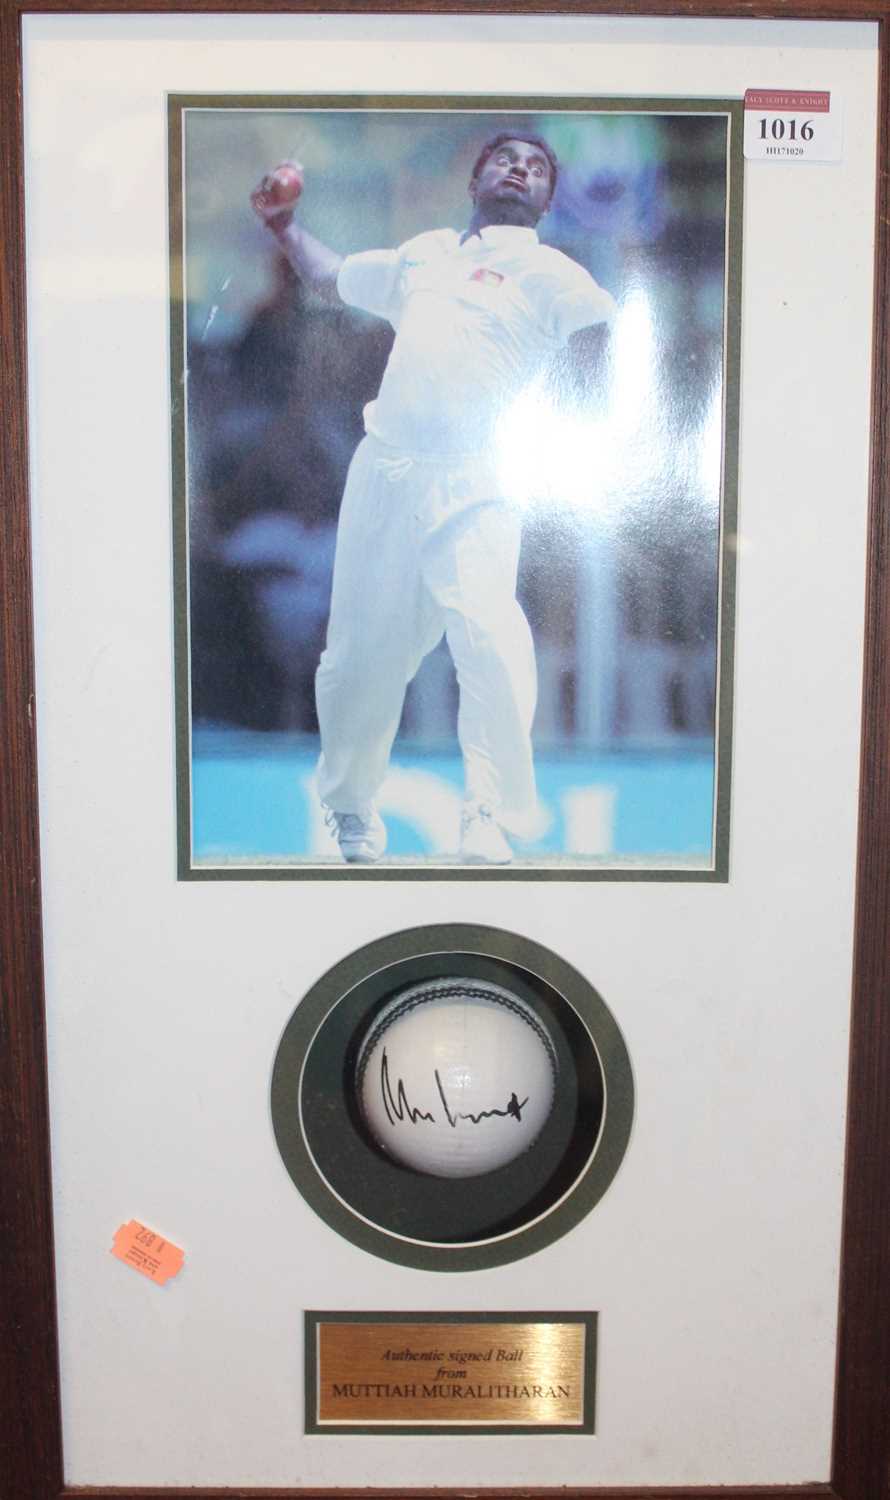 Cricket interest - a cricket ball signed by Muttiah Muralitharan in gazed display case with